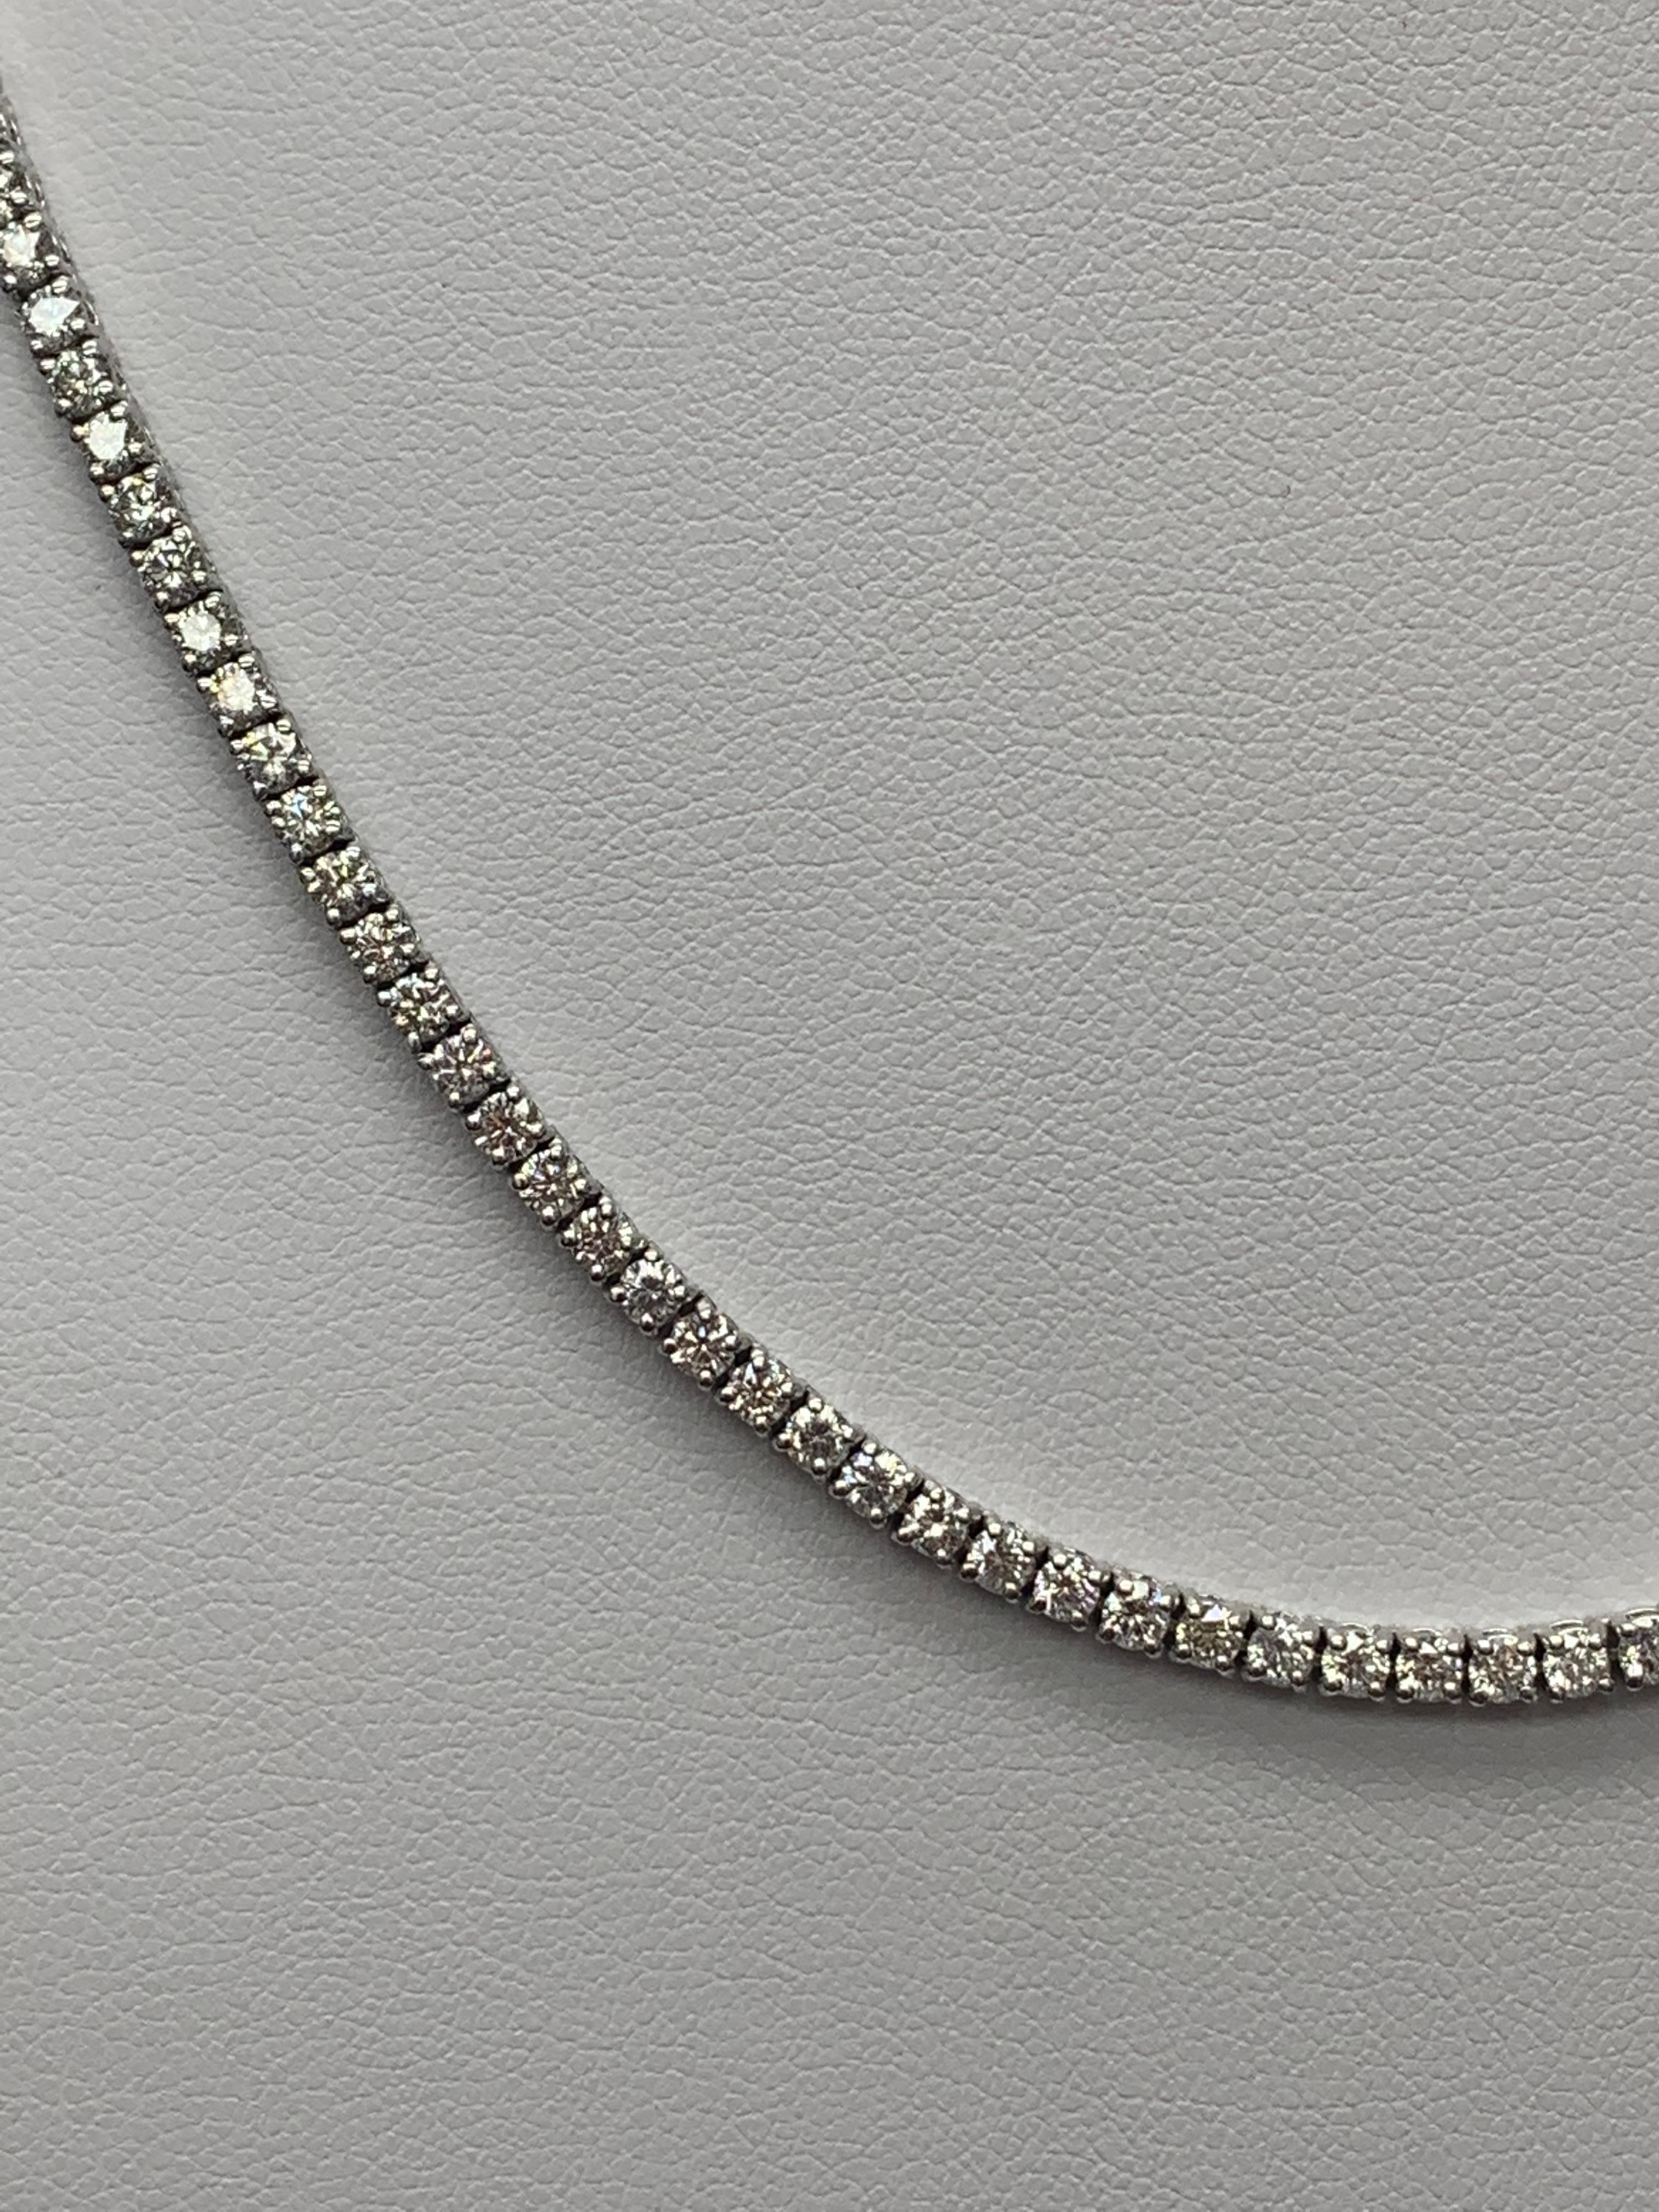 8.01 Carat Diamond Tennis Necklace in 14K White Gold In New Condition For Sale In NEW YORK, NY